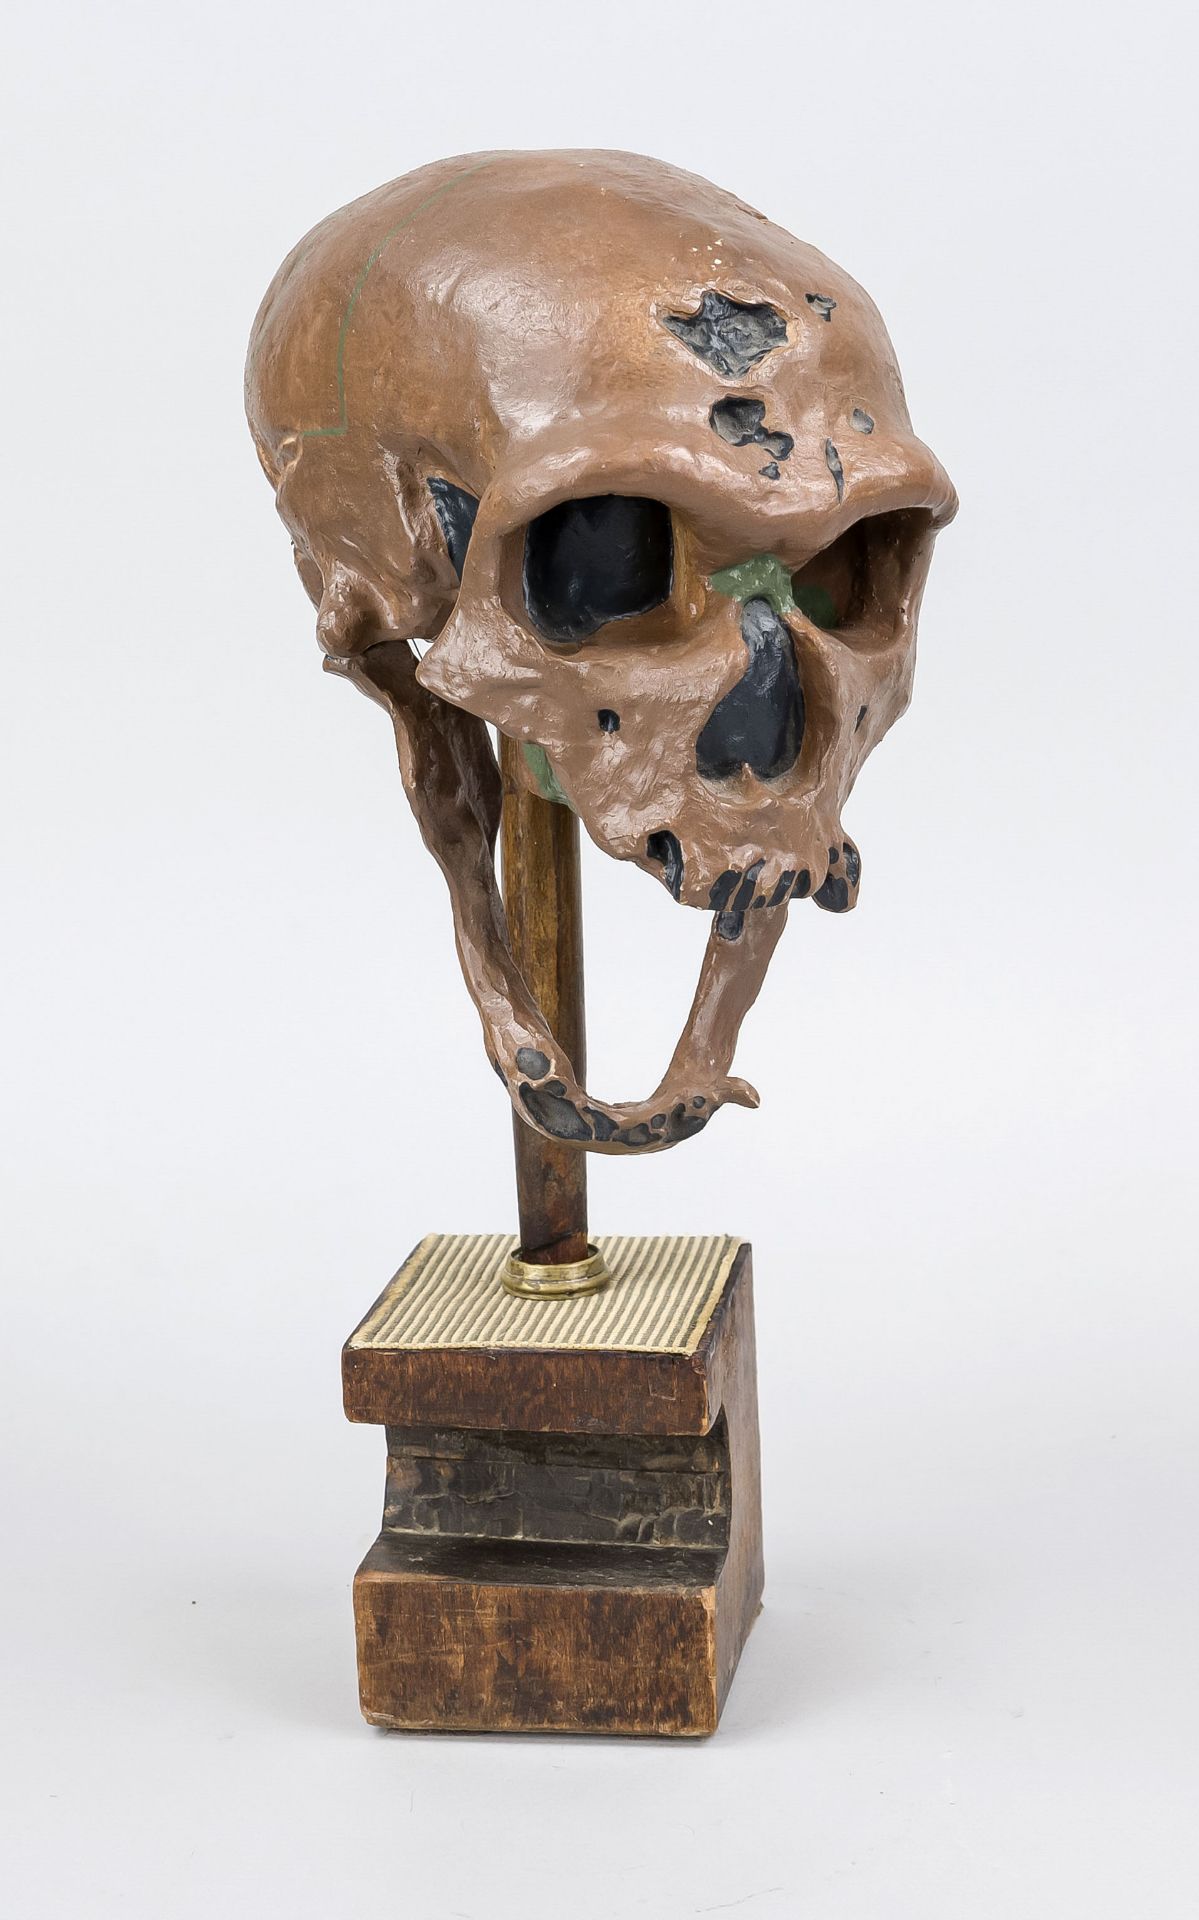 Skull of a Neanderthal man, 20th century, colored plastic, replica of the find from La Chapelle-